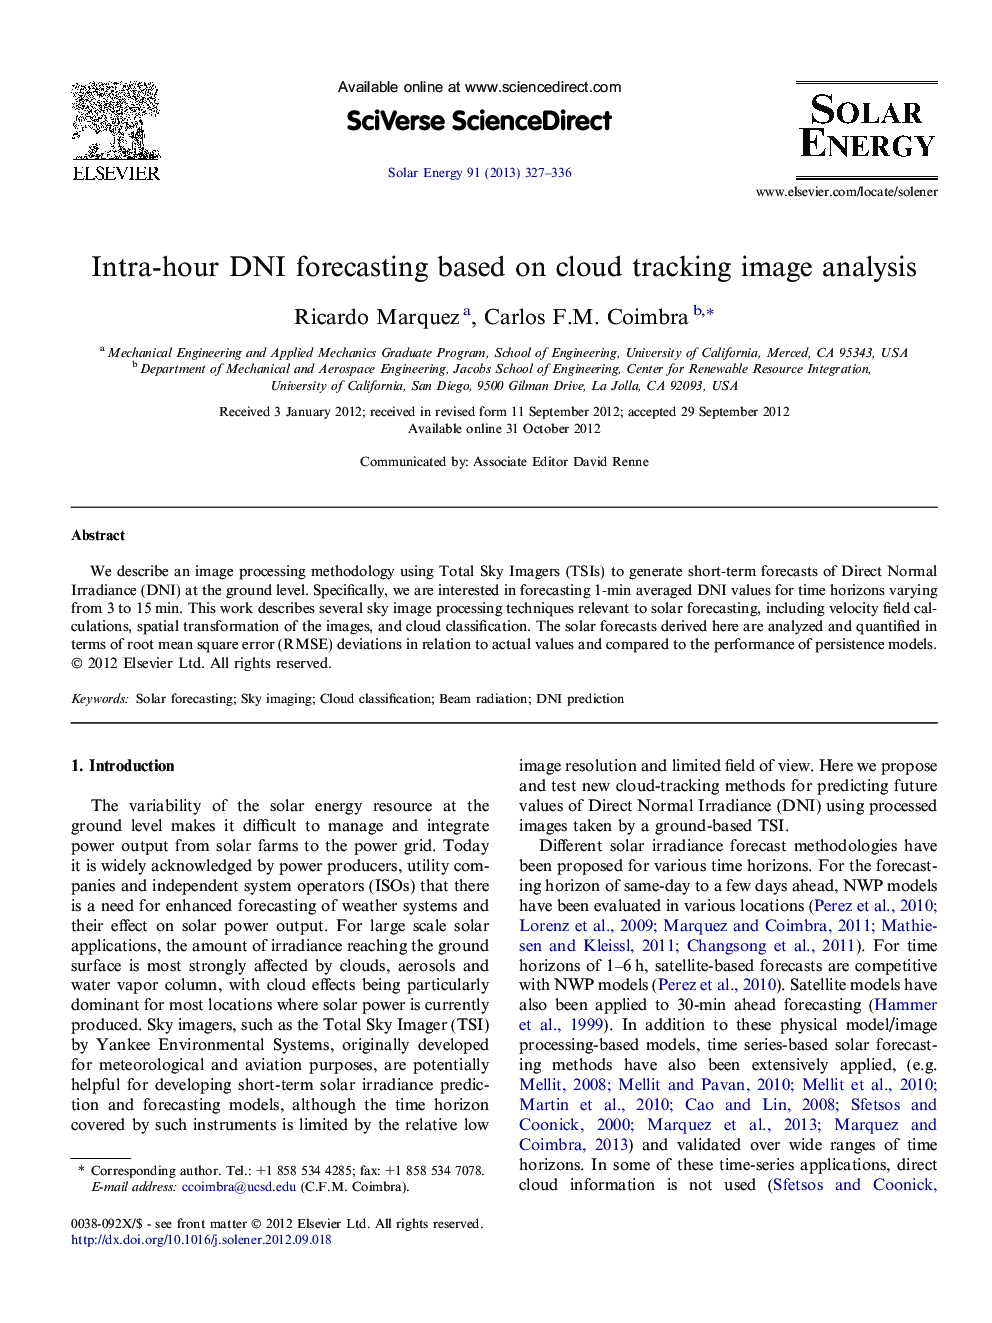 Intra-hour DNI forecasting based on cloud tracking image analysis